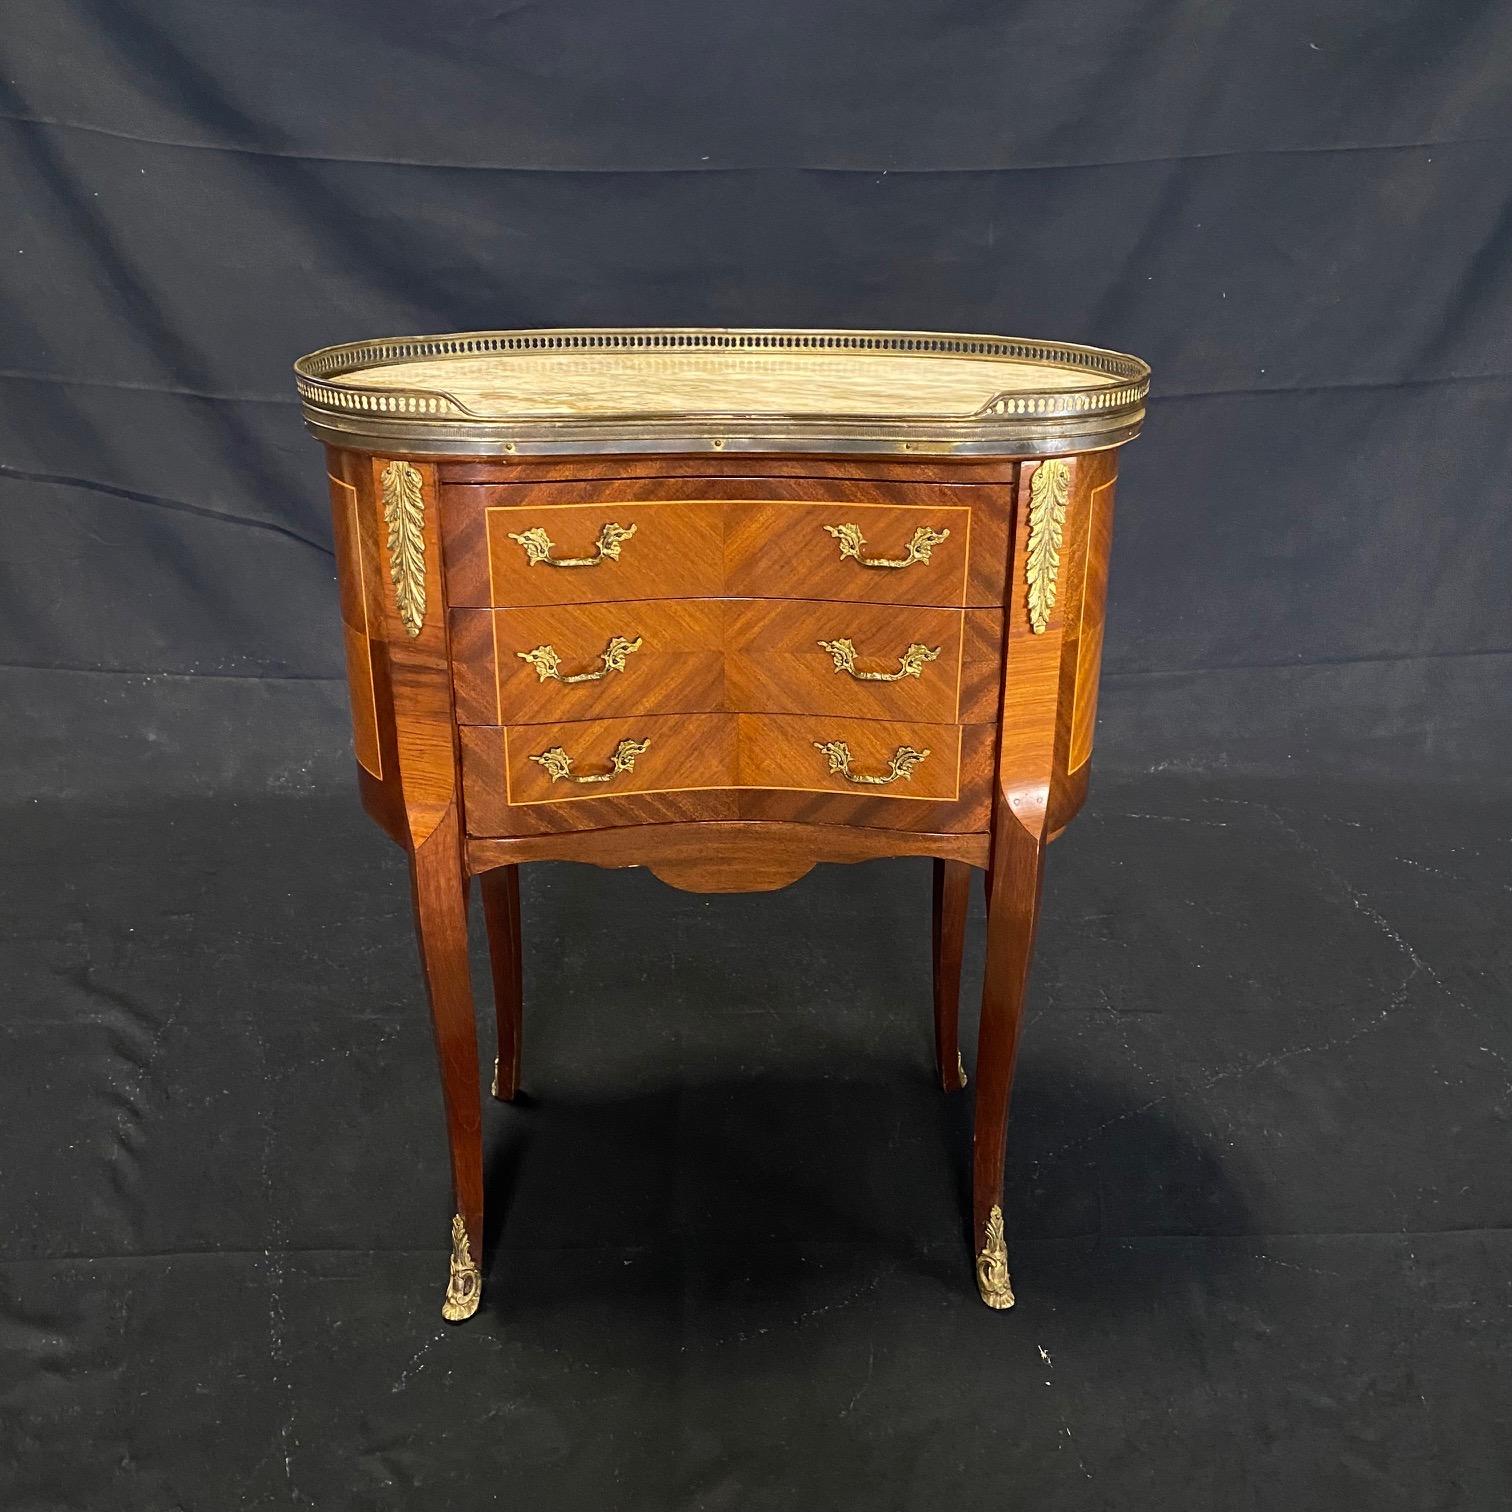 These are a pair of lovely, sophisticated night stands or mini commodes made of solid walnut with beautiful brass trim and marble tops.
#5846

 H to marble top 28”.
 